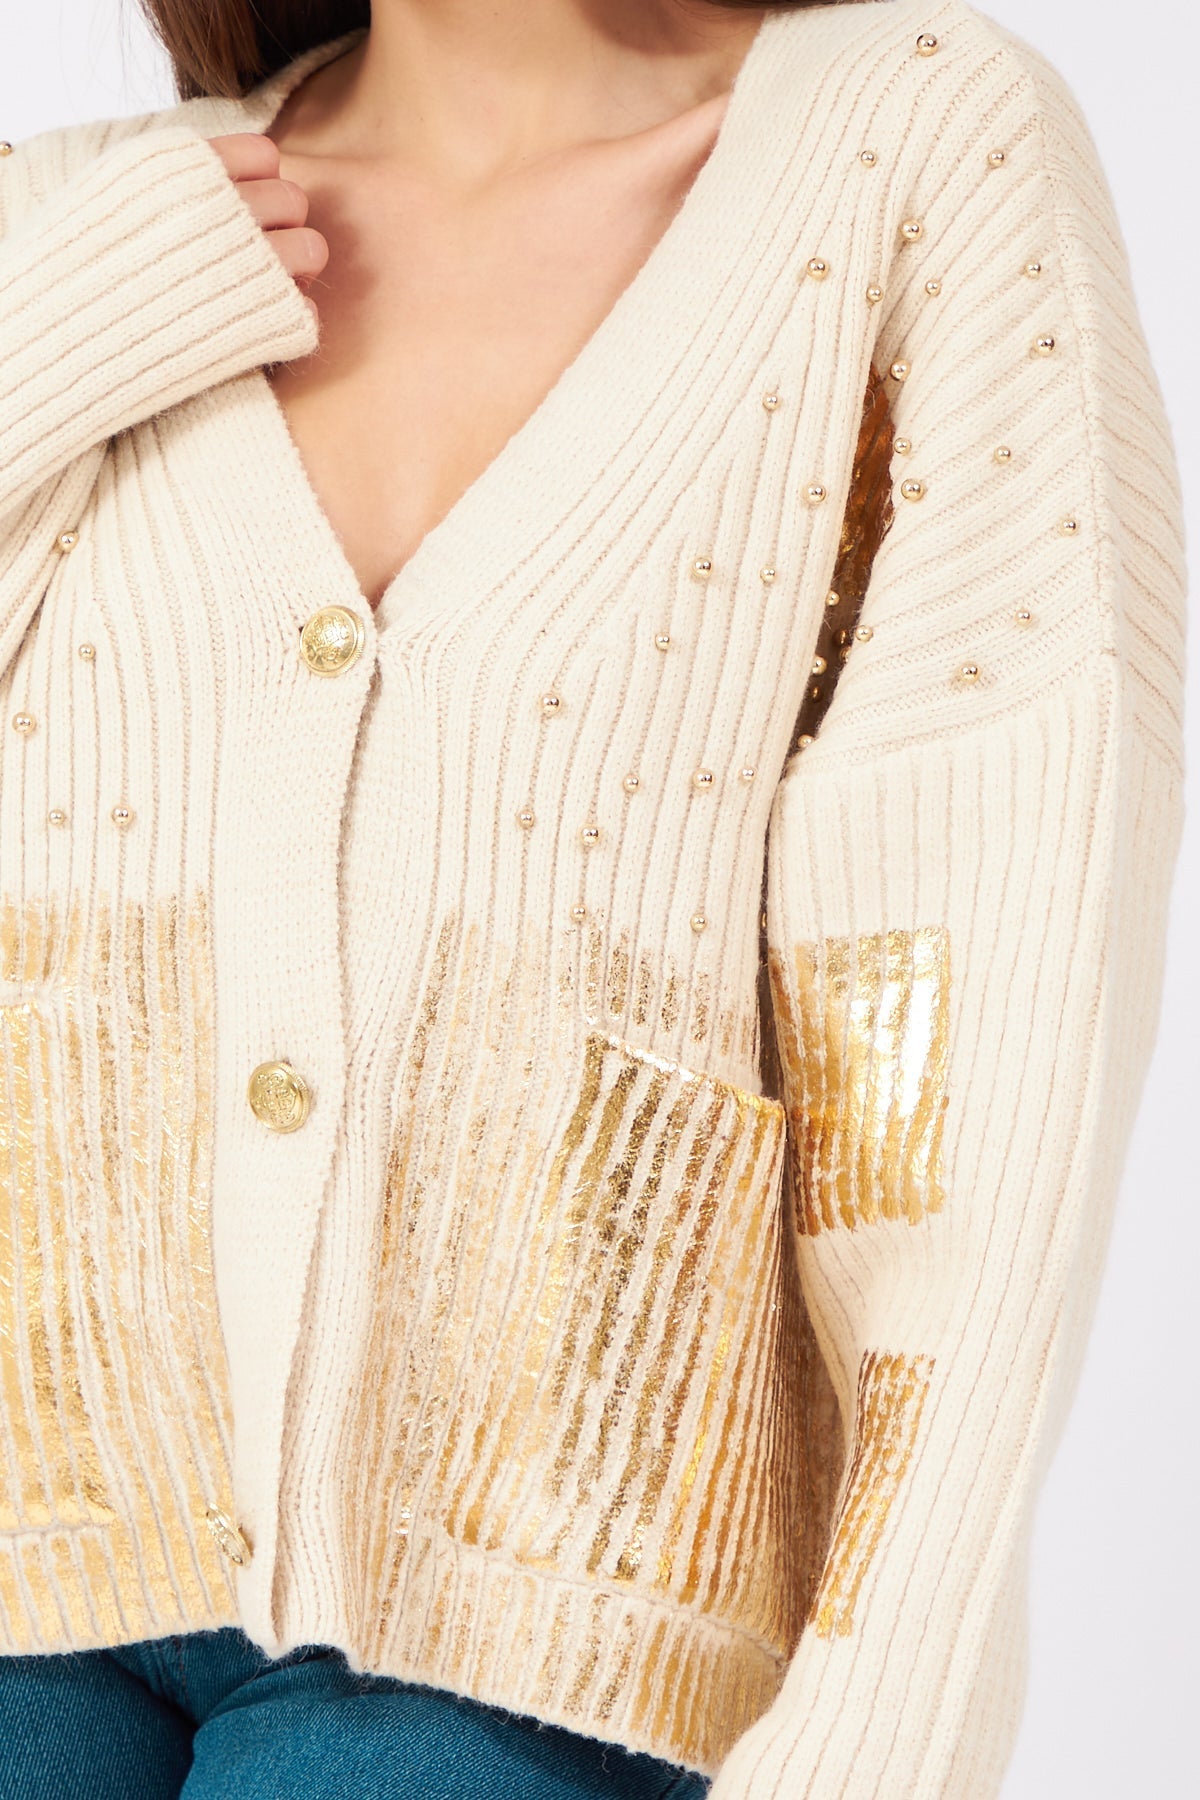 Off White With Gold Pearl Cardigan - Lebbse